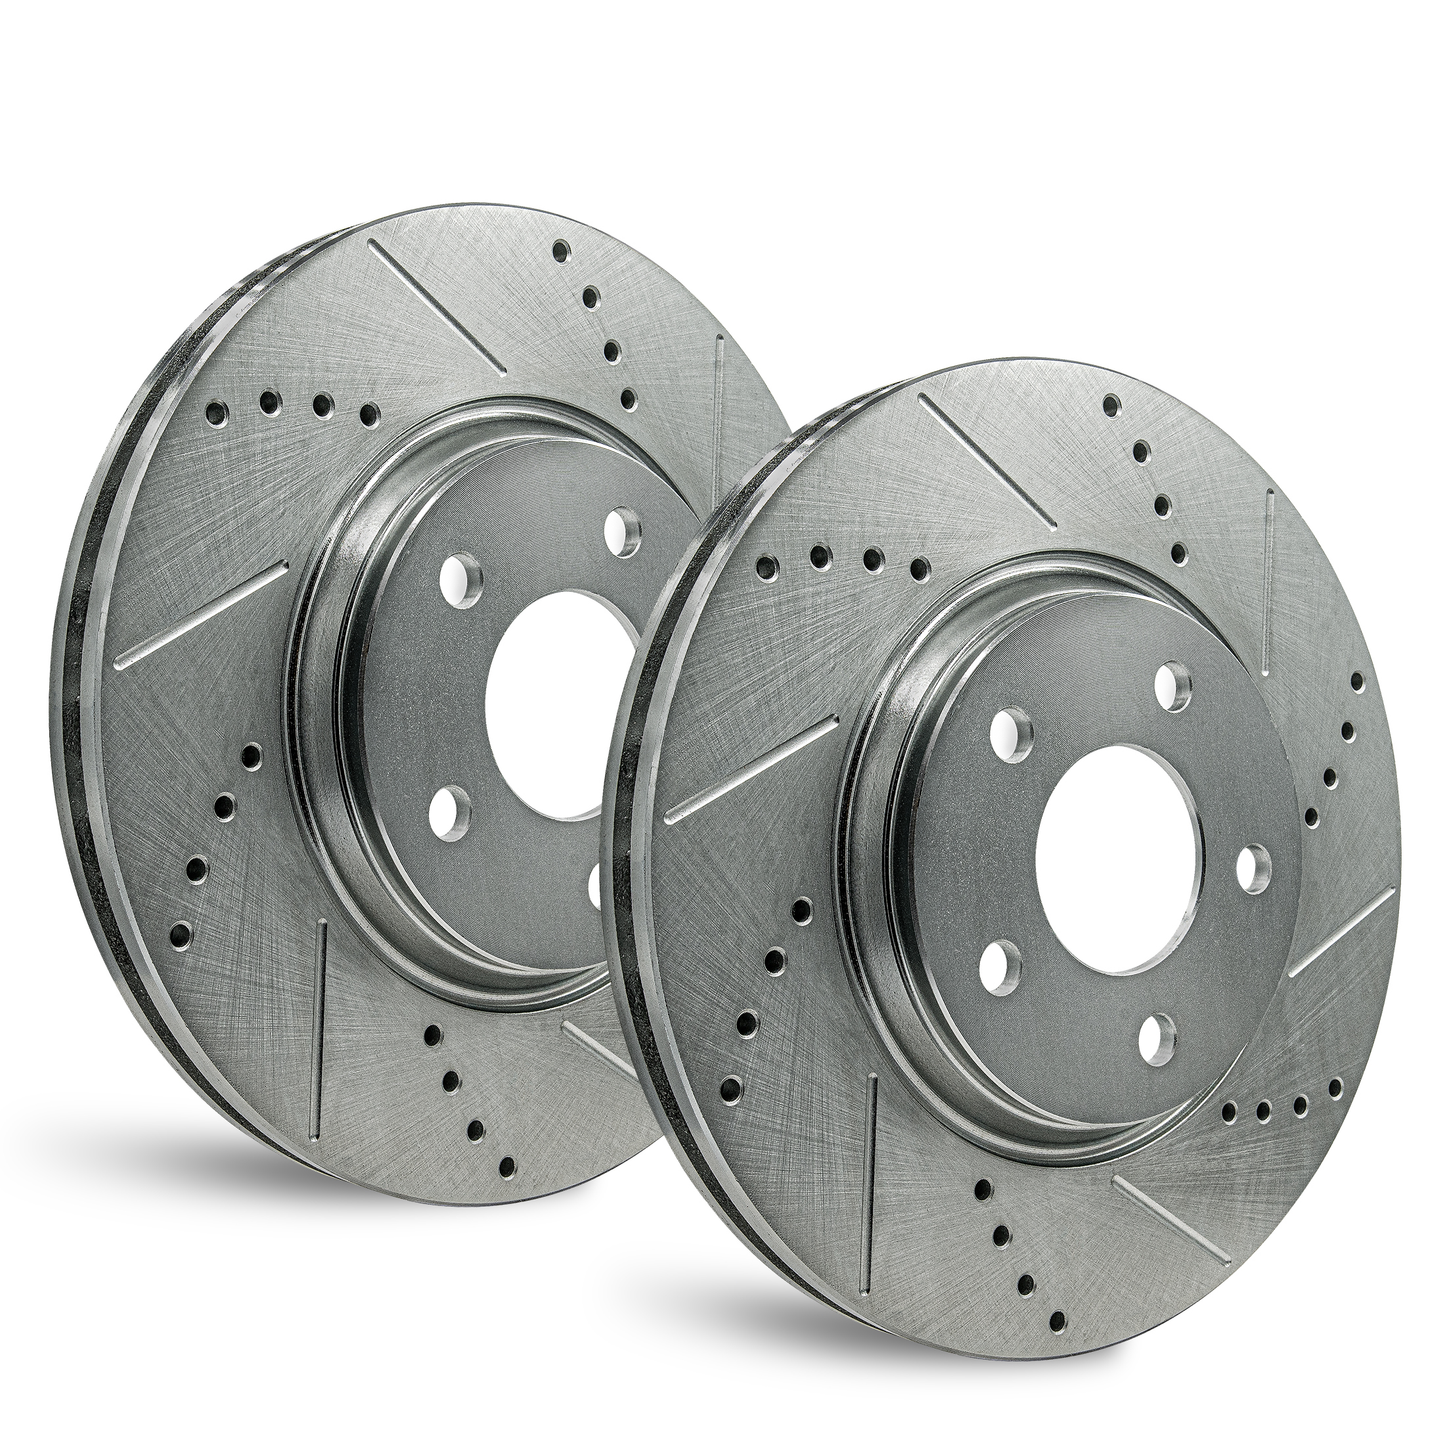 Front | Zinc Drilled/Slot Brake Rotors for Acura MDX 2007-2013